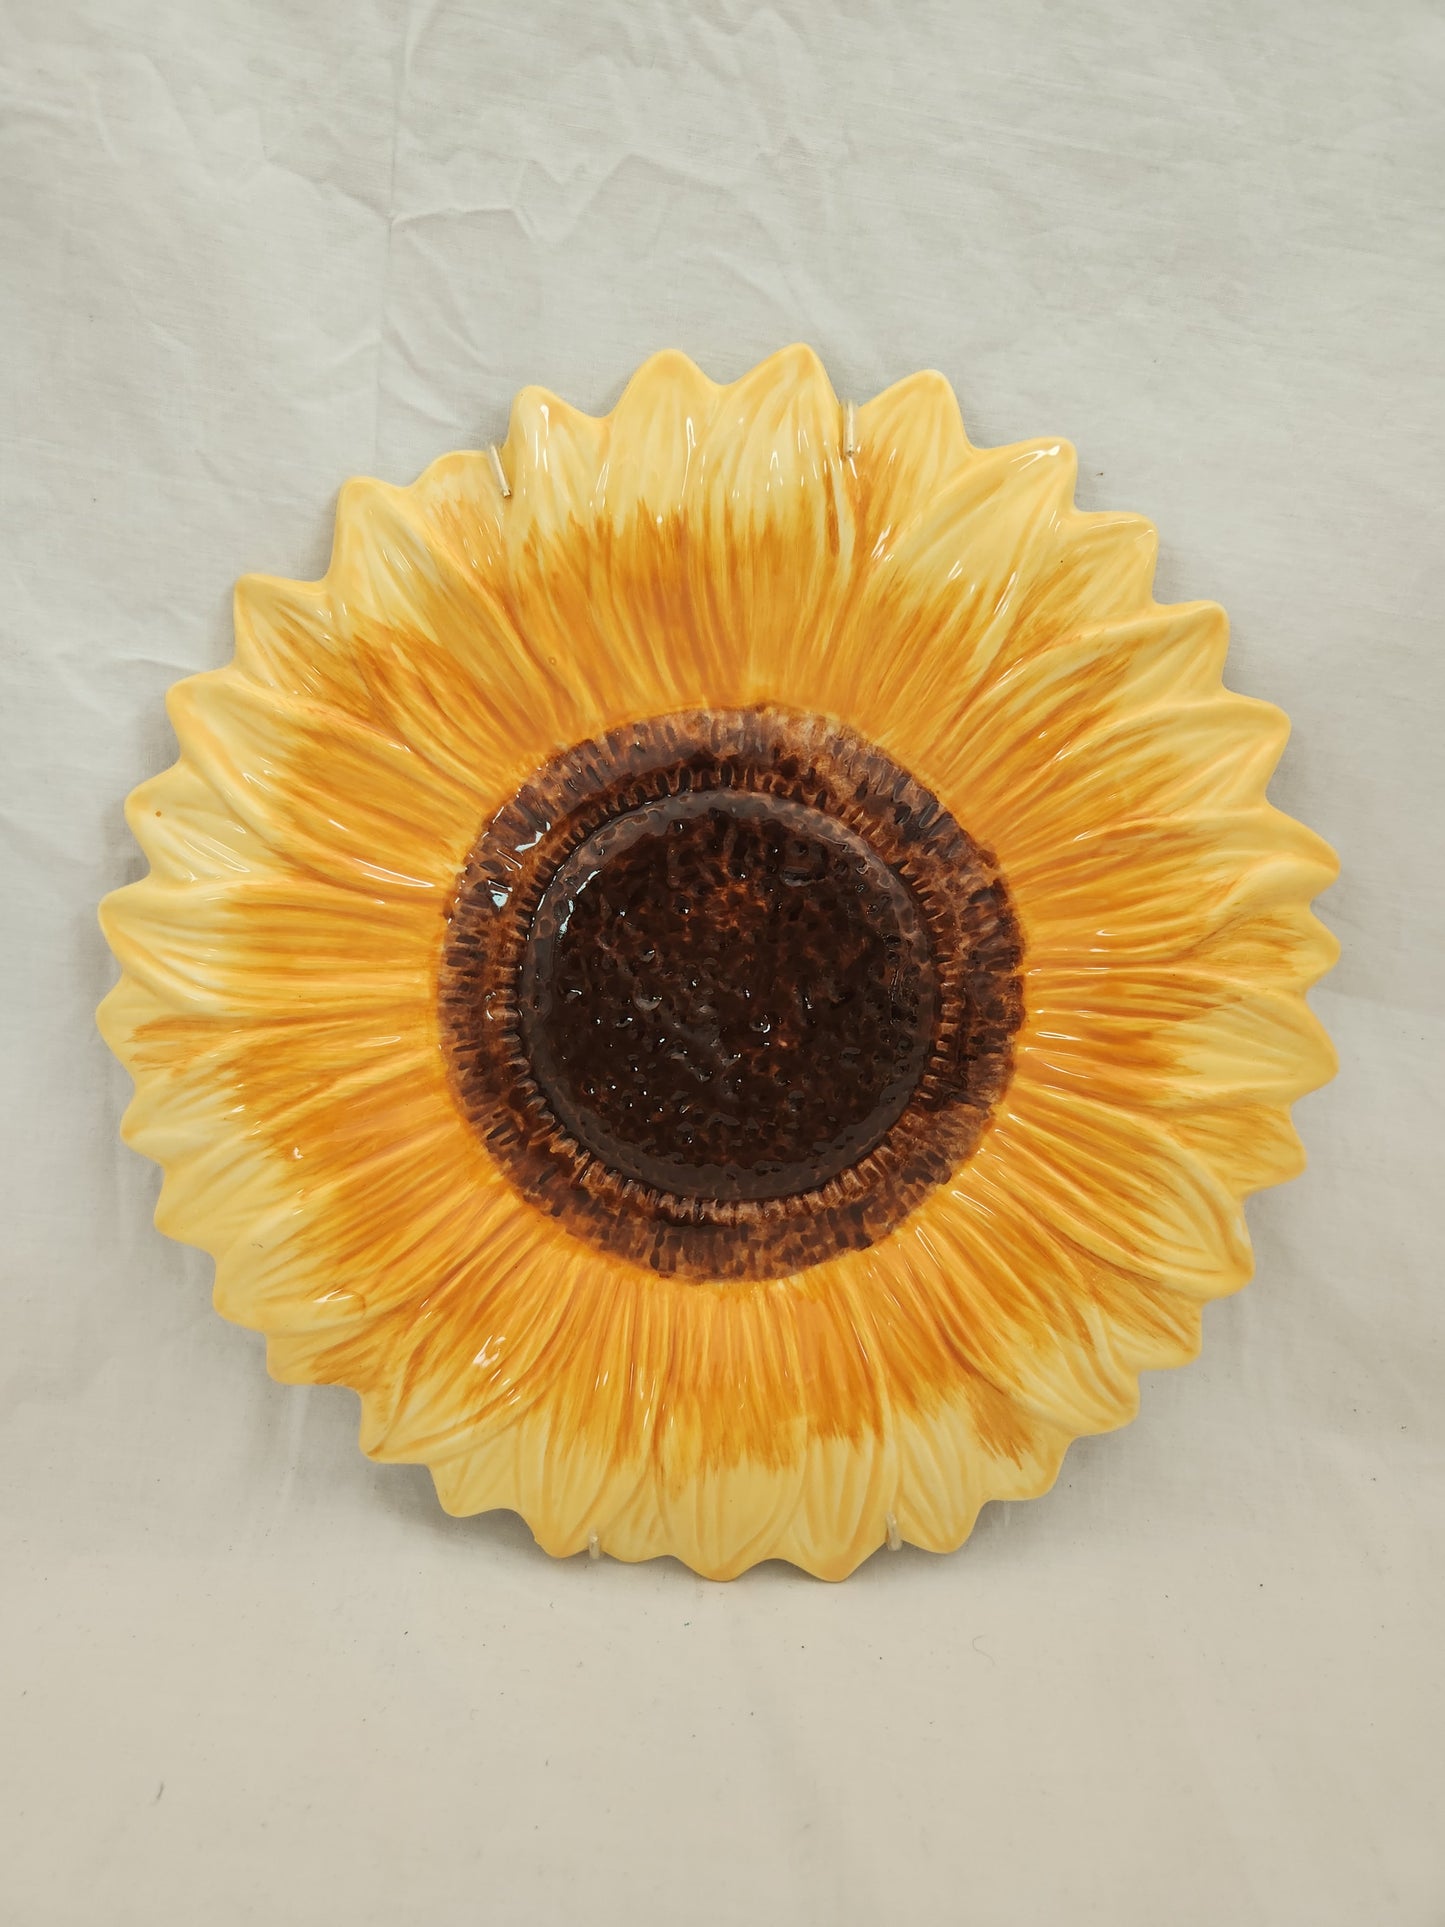 Tuscan Sunflower Decorative Plate by Home Essentials and Beyond - made in PRC